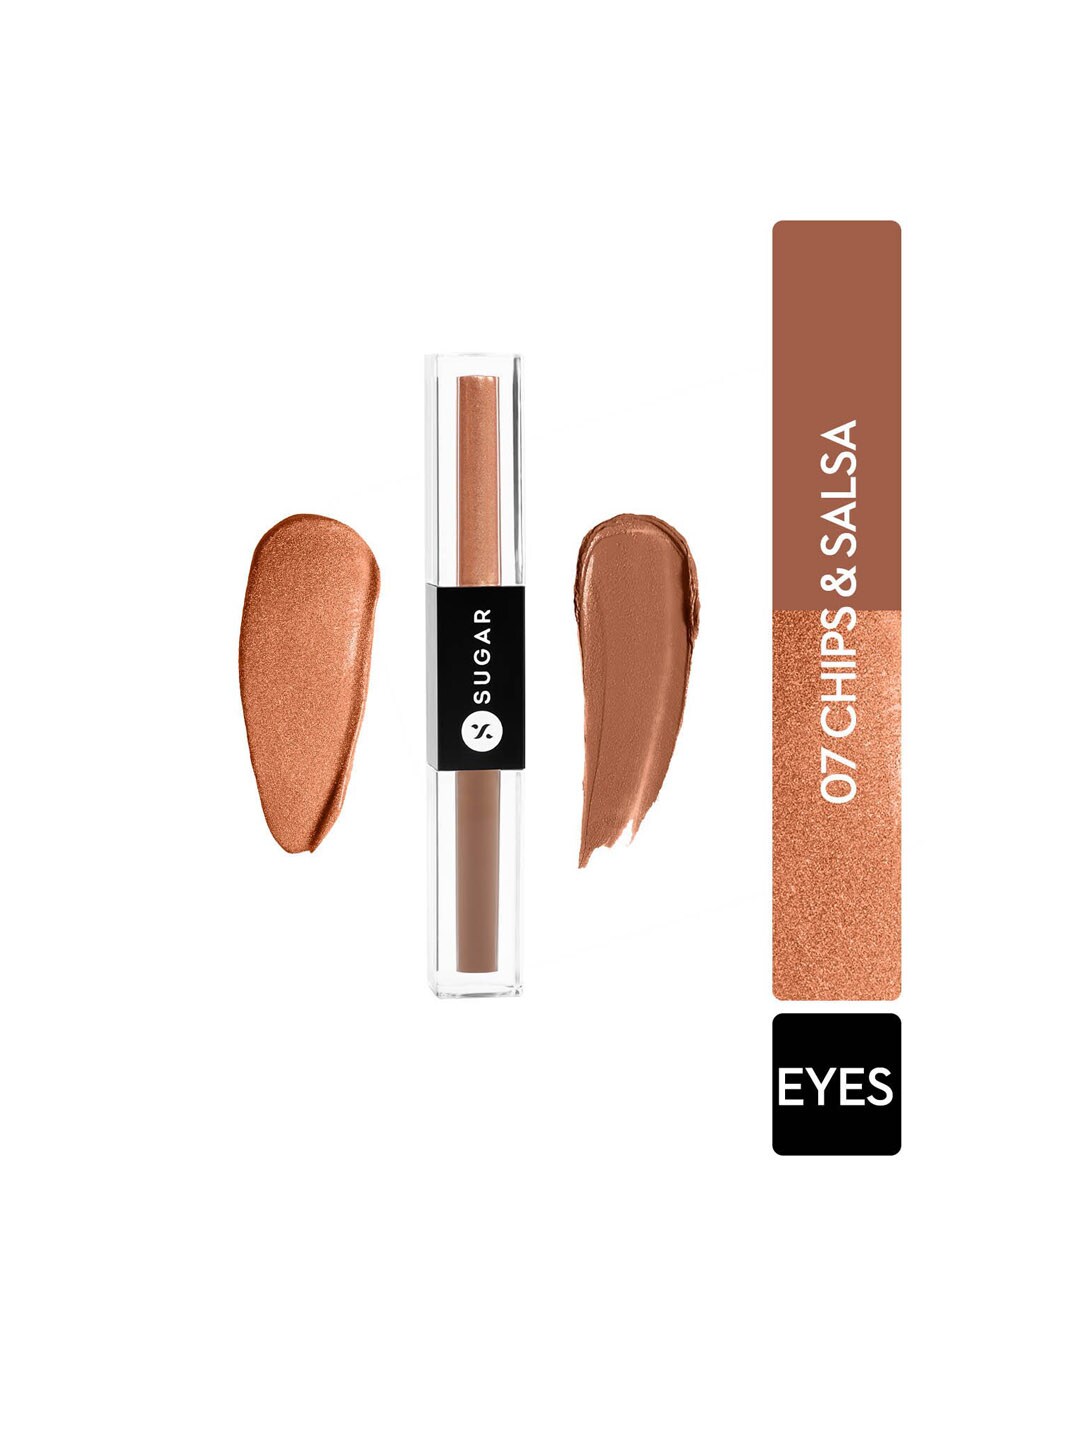 SUGAR Two Good To Be True Dual Eyeshadow 1.5ml Each Side - 07 Chips & Salsa Price in India